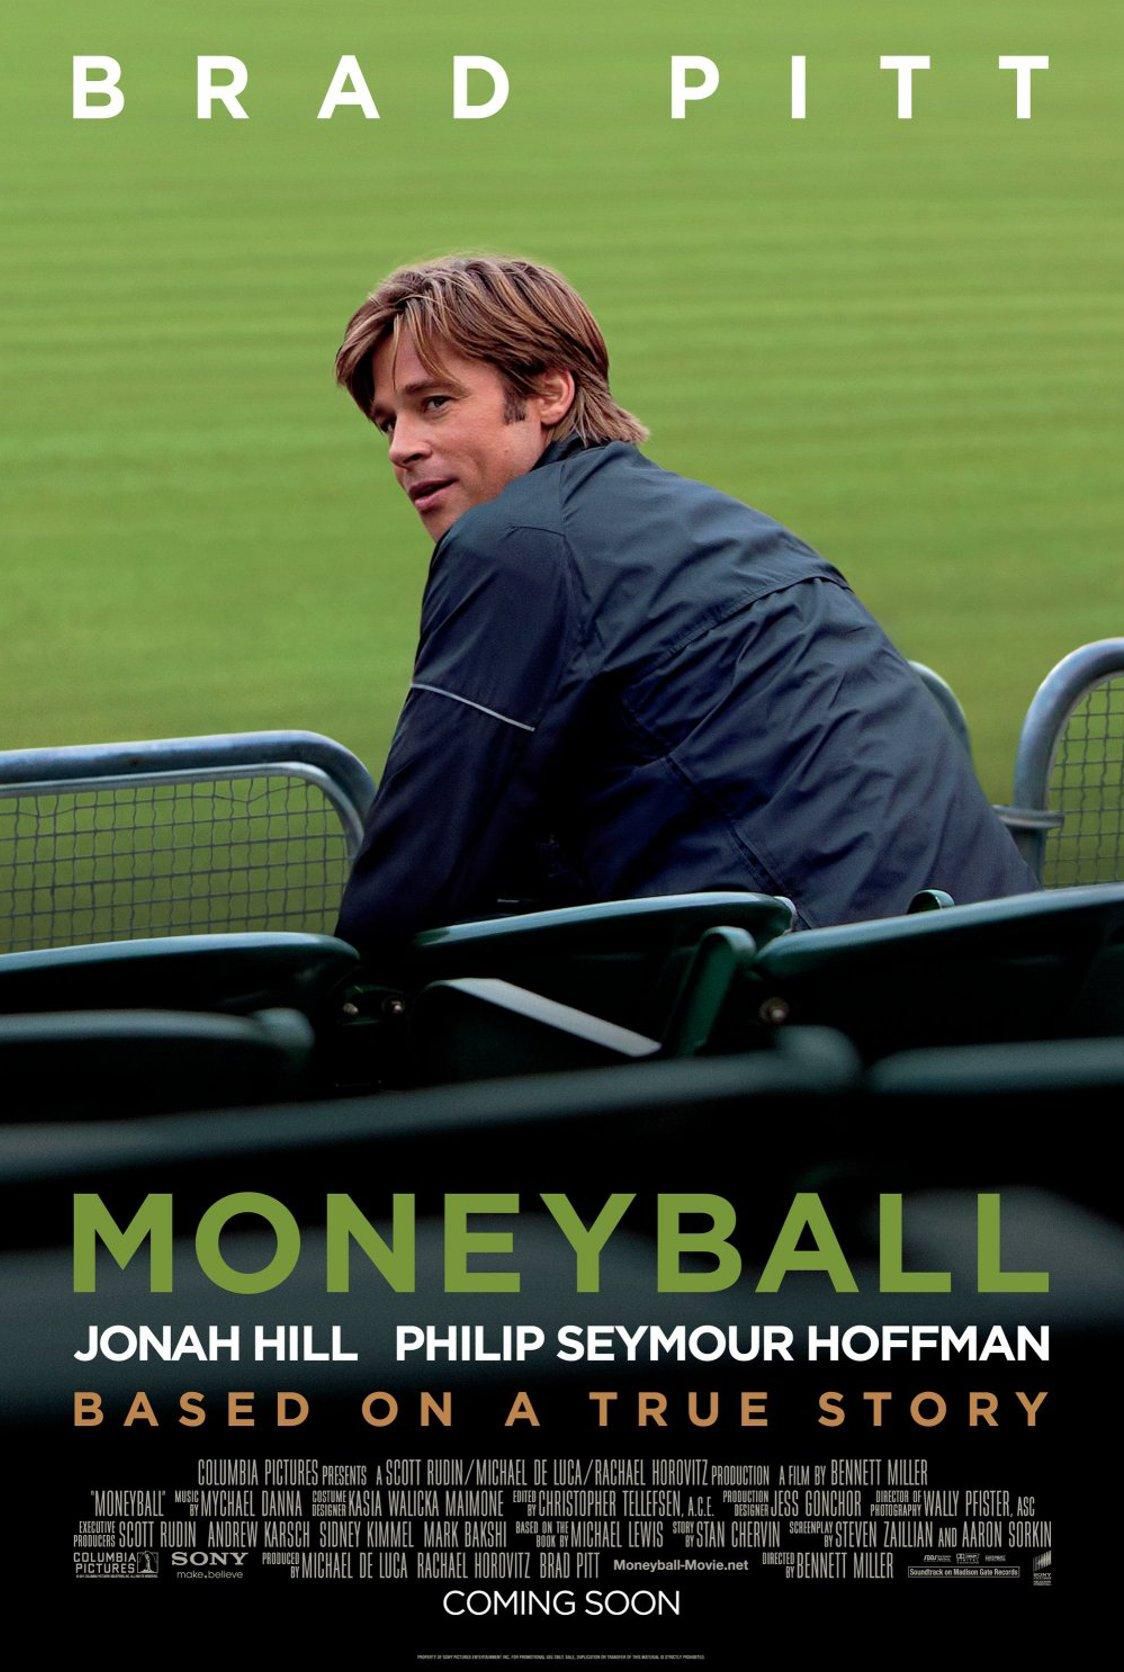 Why we play Moneyball rather than Powerball